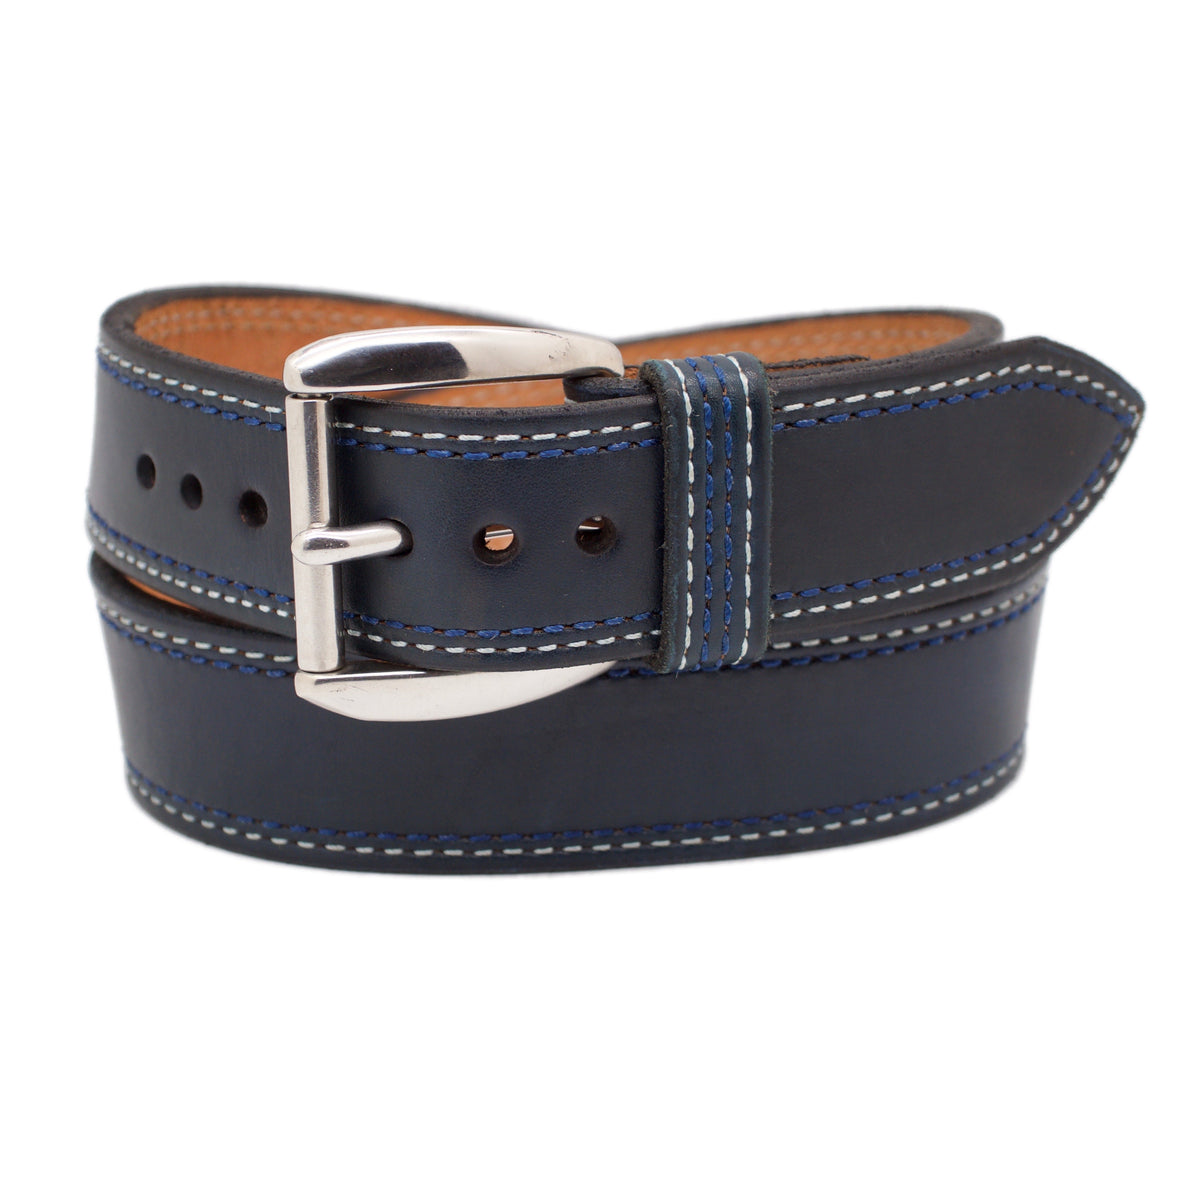 The BLUEBERRY HILL WIDE 1.75 Leather Belt